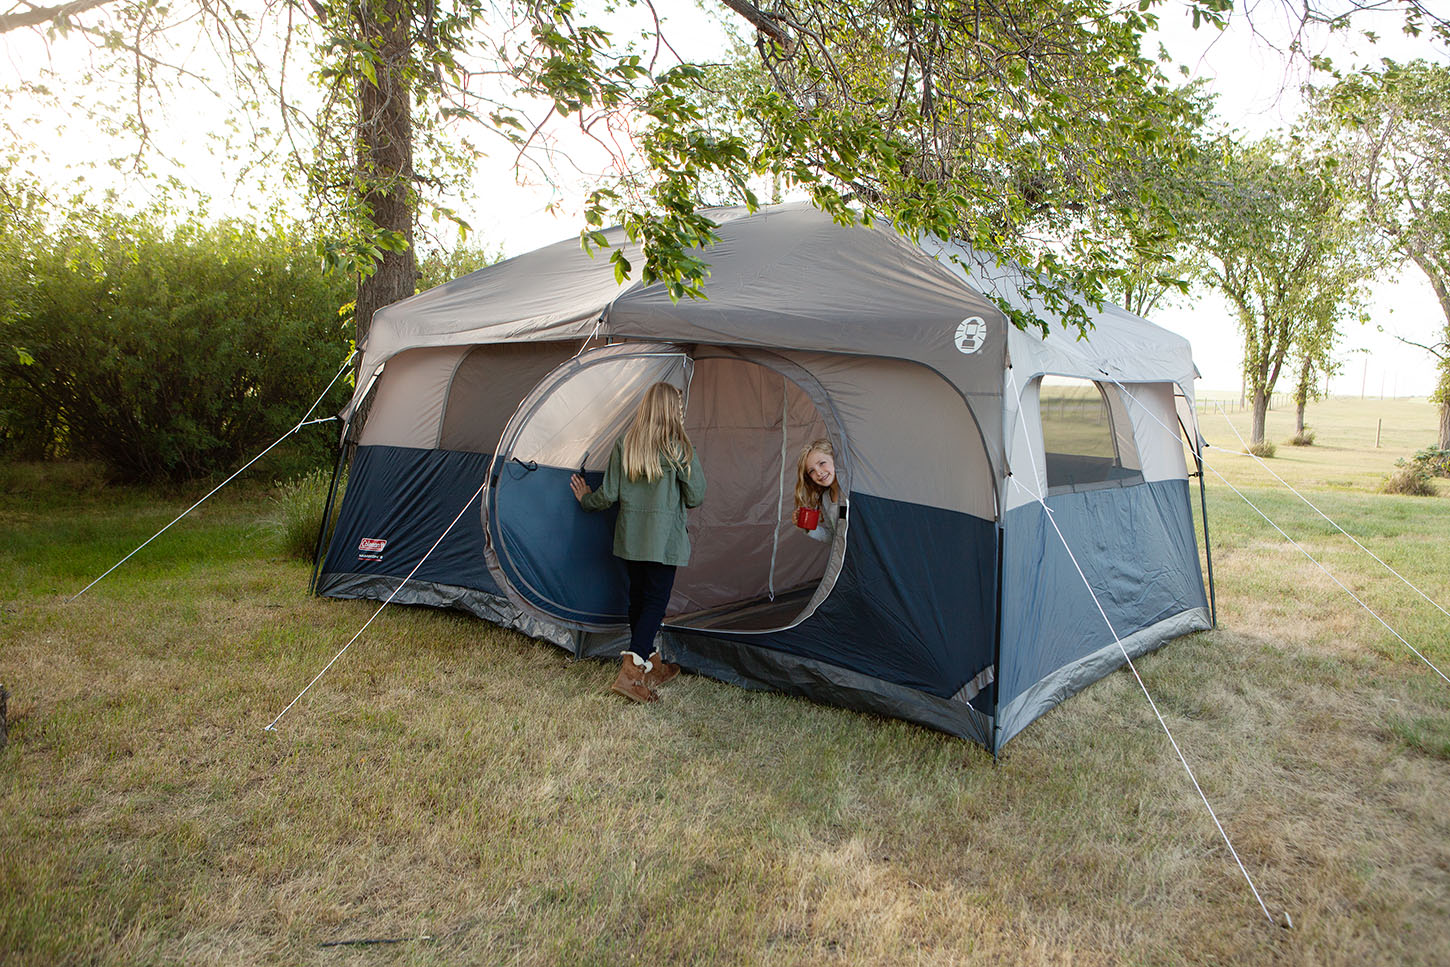 Getting outside doesn't have to mean adventuring far from home. Make special memories by planning a backyard camping adventure this summer!